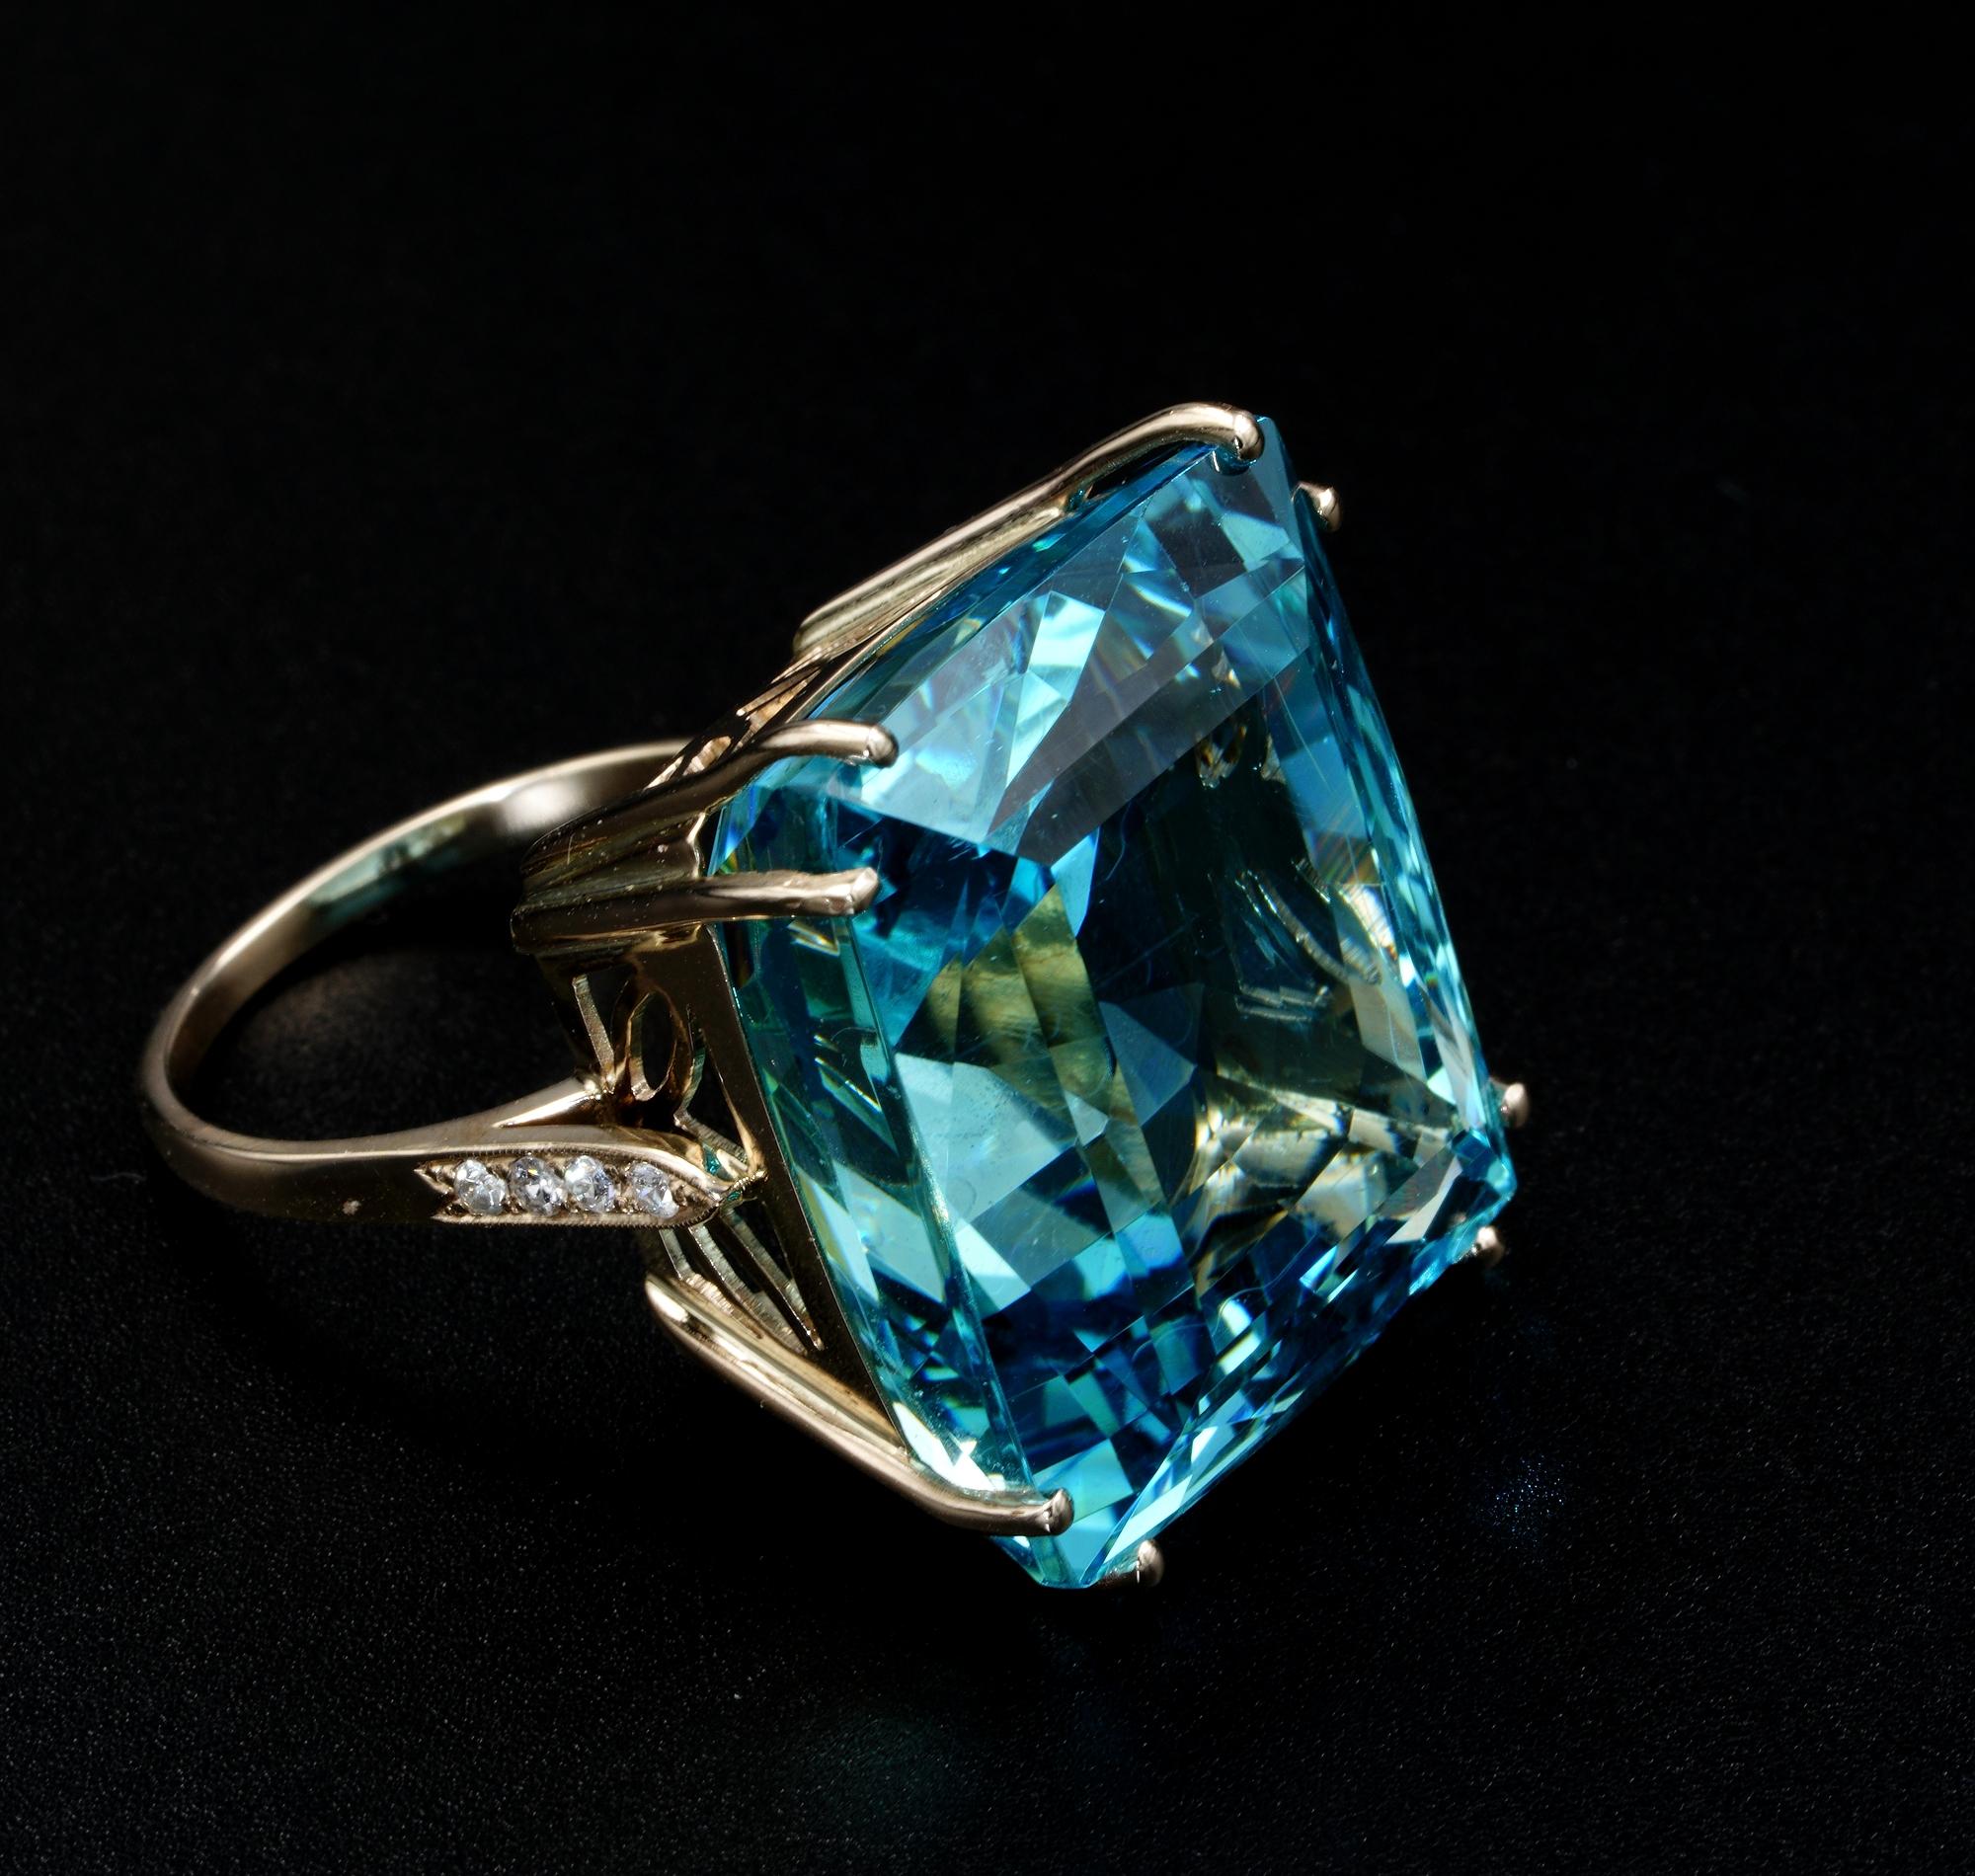 Classy Masterpiece
A magnificent Aquamarine statement ring
It features a central emerald cut, natural untreated Aquamarine weighing an impressive 50.00 carats which has a wonderful sky-blue hue with green overtone (22.53 x 19.54 mm.)
Flanking the